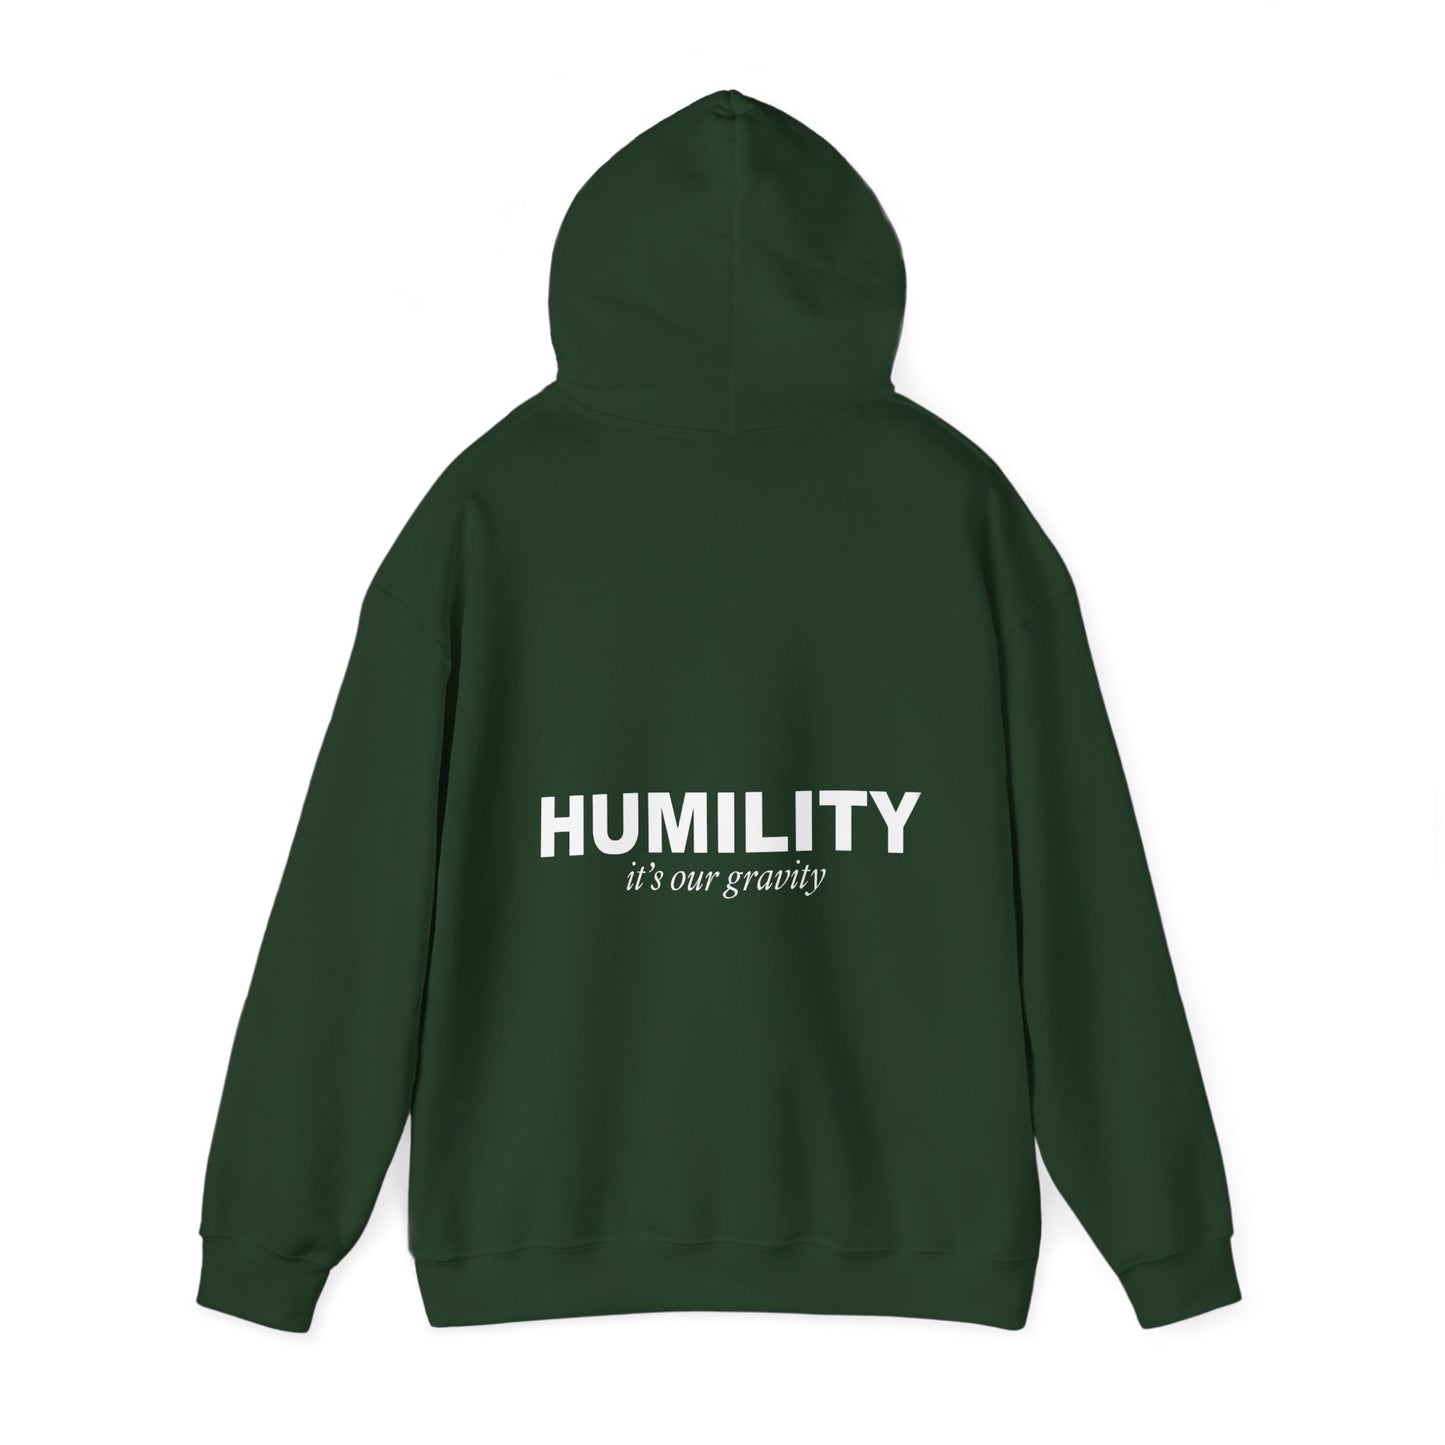 Humility - It’s Our Gravity Hoodie